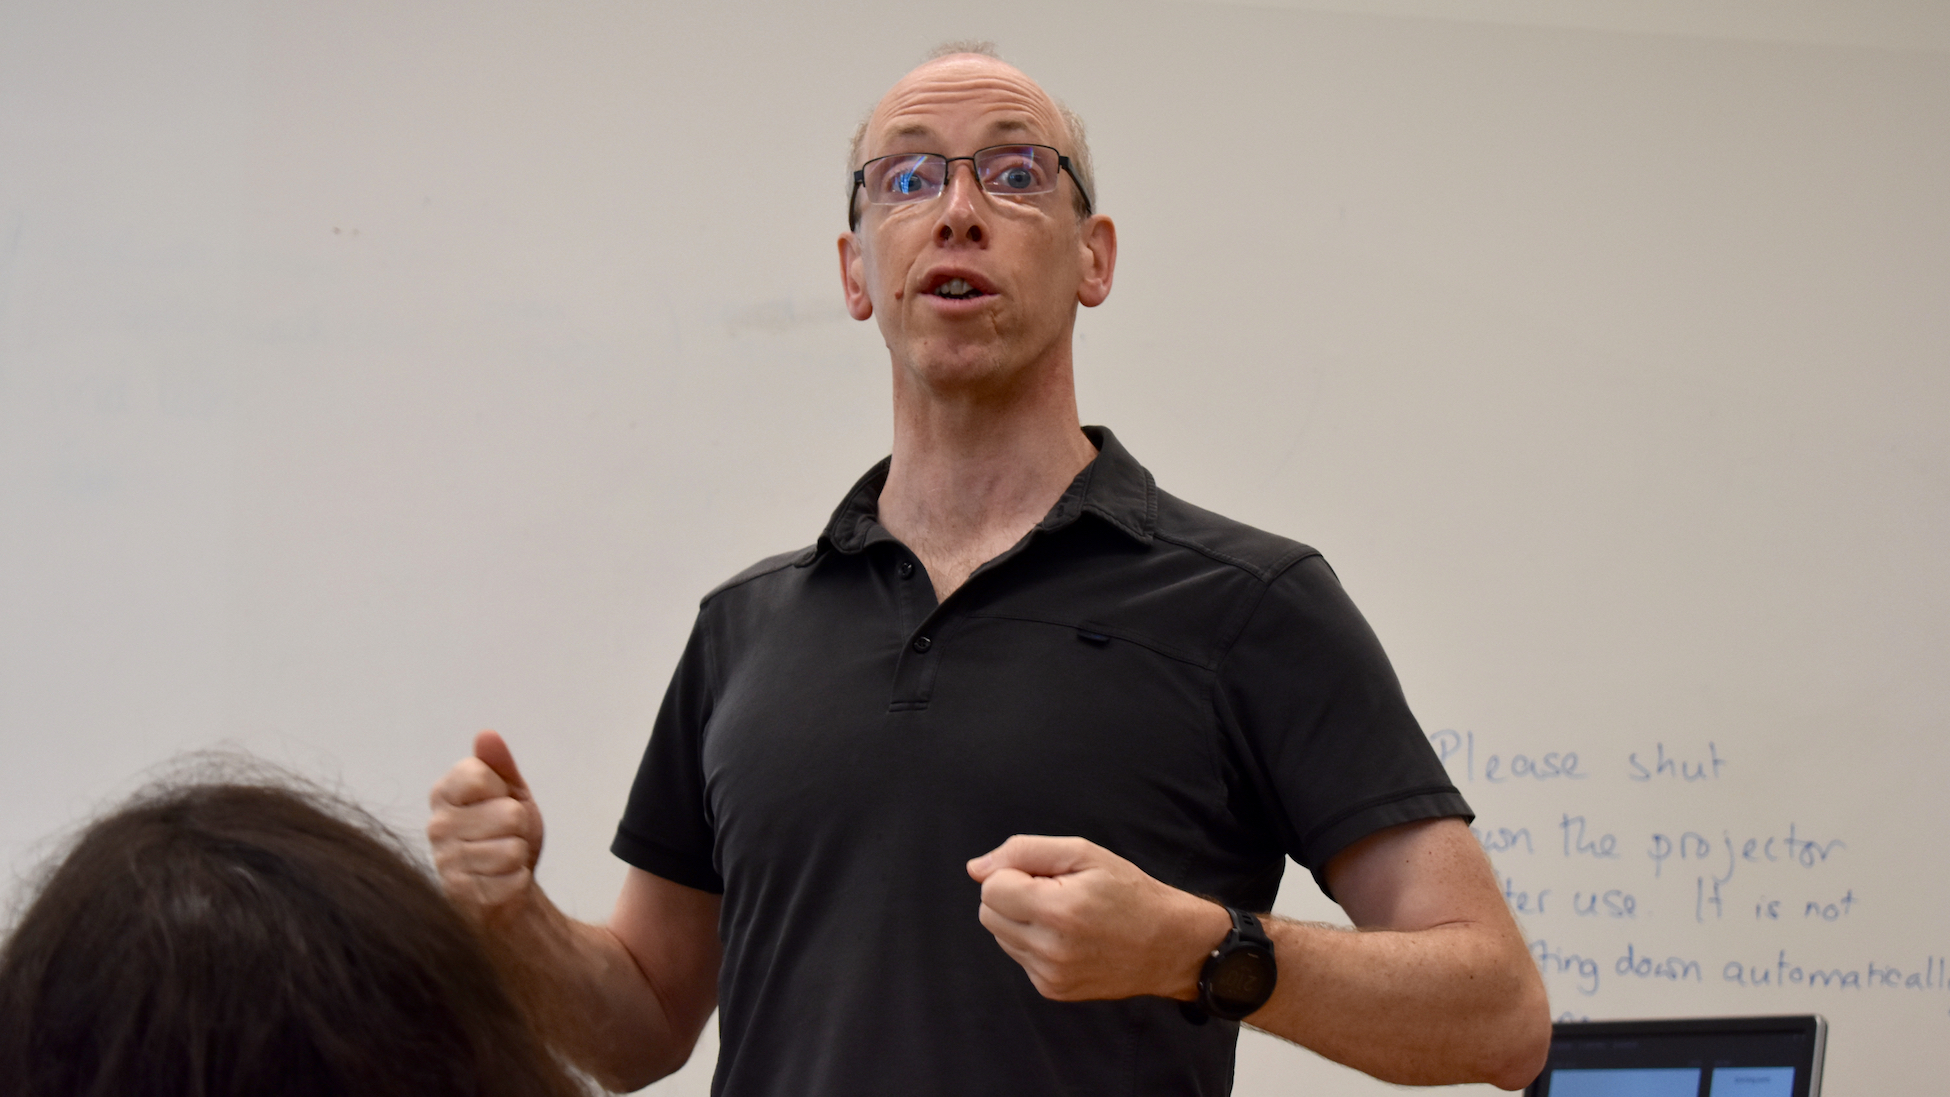 Professor Colin Phillips, in a black short-sleeved collared athletic shirt, making an introduction